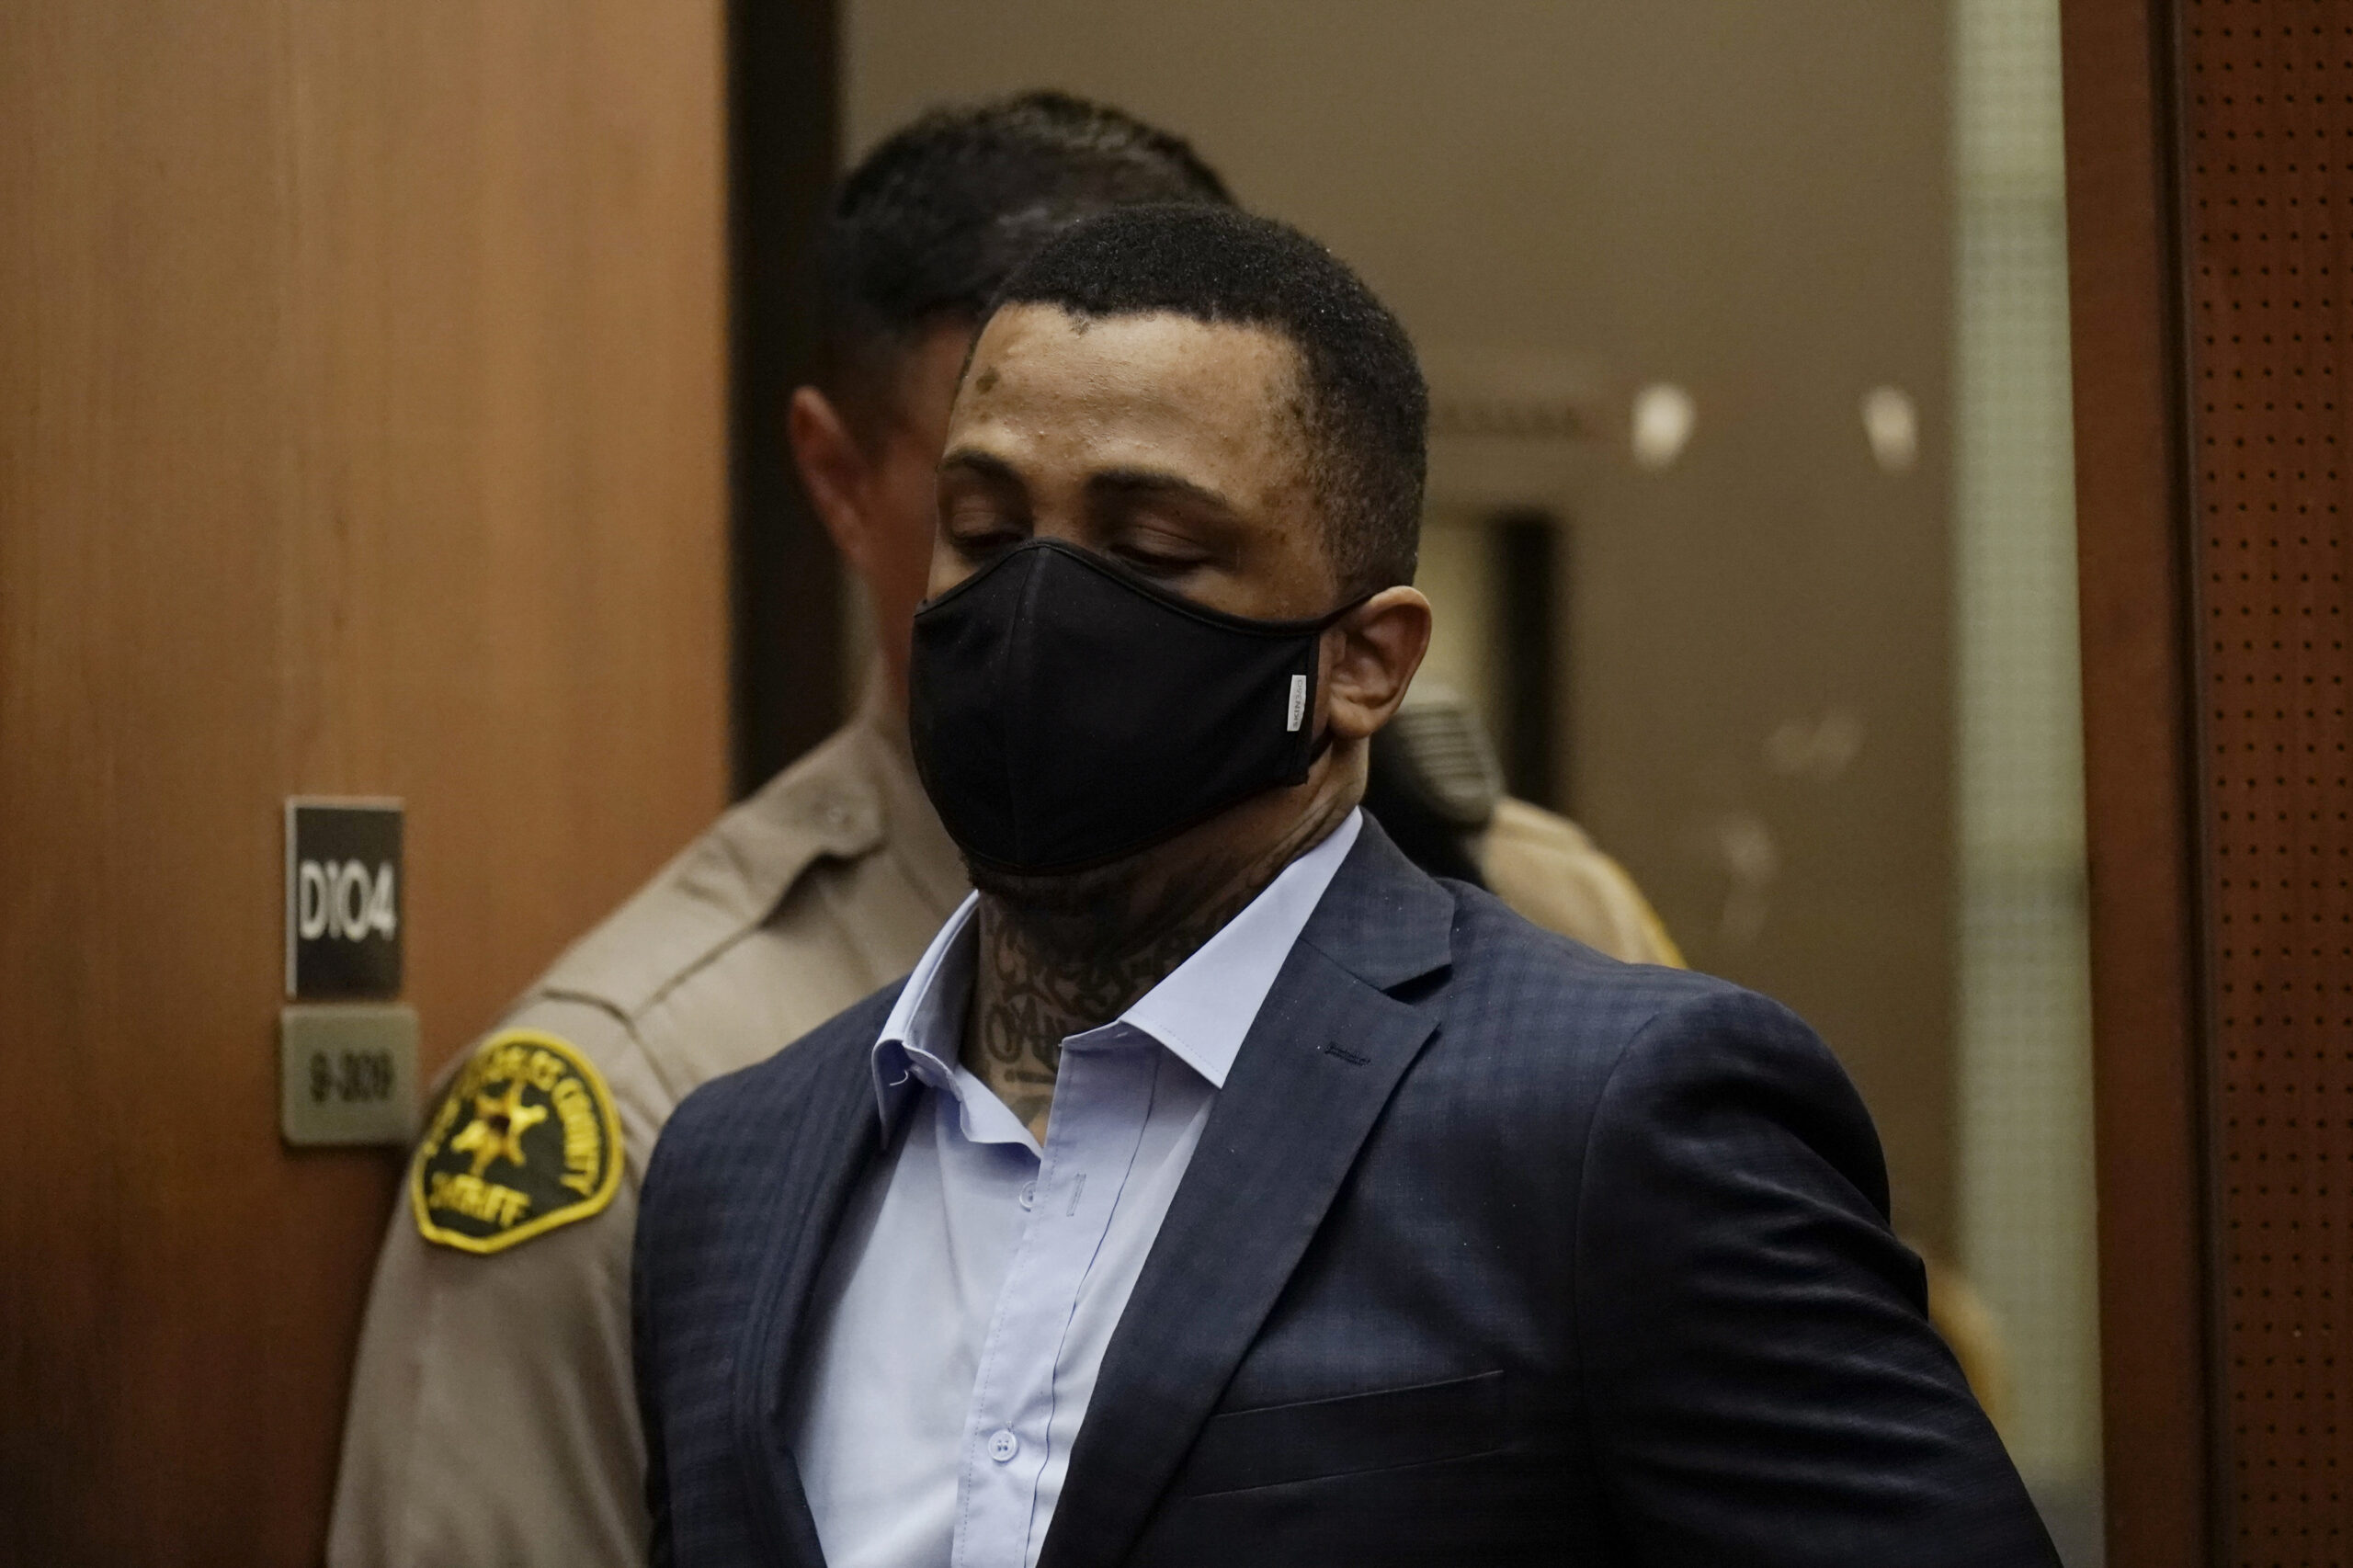 Eric Holder Jr., who is accused of killing rapper Nipsey Hussle, enters a courtroom to hear the verdicts in his murder trial at Los Angeles Superior Court in Los Angeles, Wednesday, July 6, 2022. Jurors have found the 32-year-old man guilty of first-degree murder for the 2019 fatal shooting of the rapper. (AP Photo/Jae C. Hong, Pool)